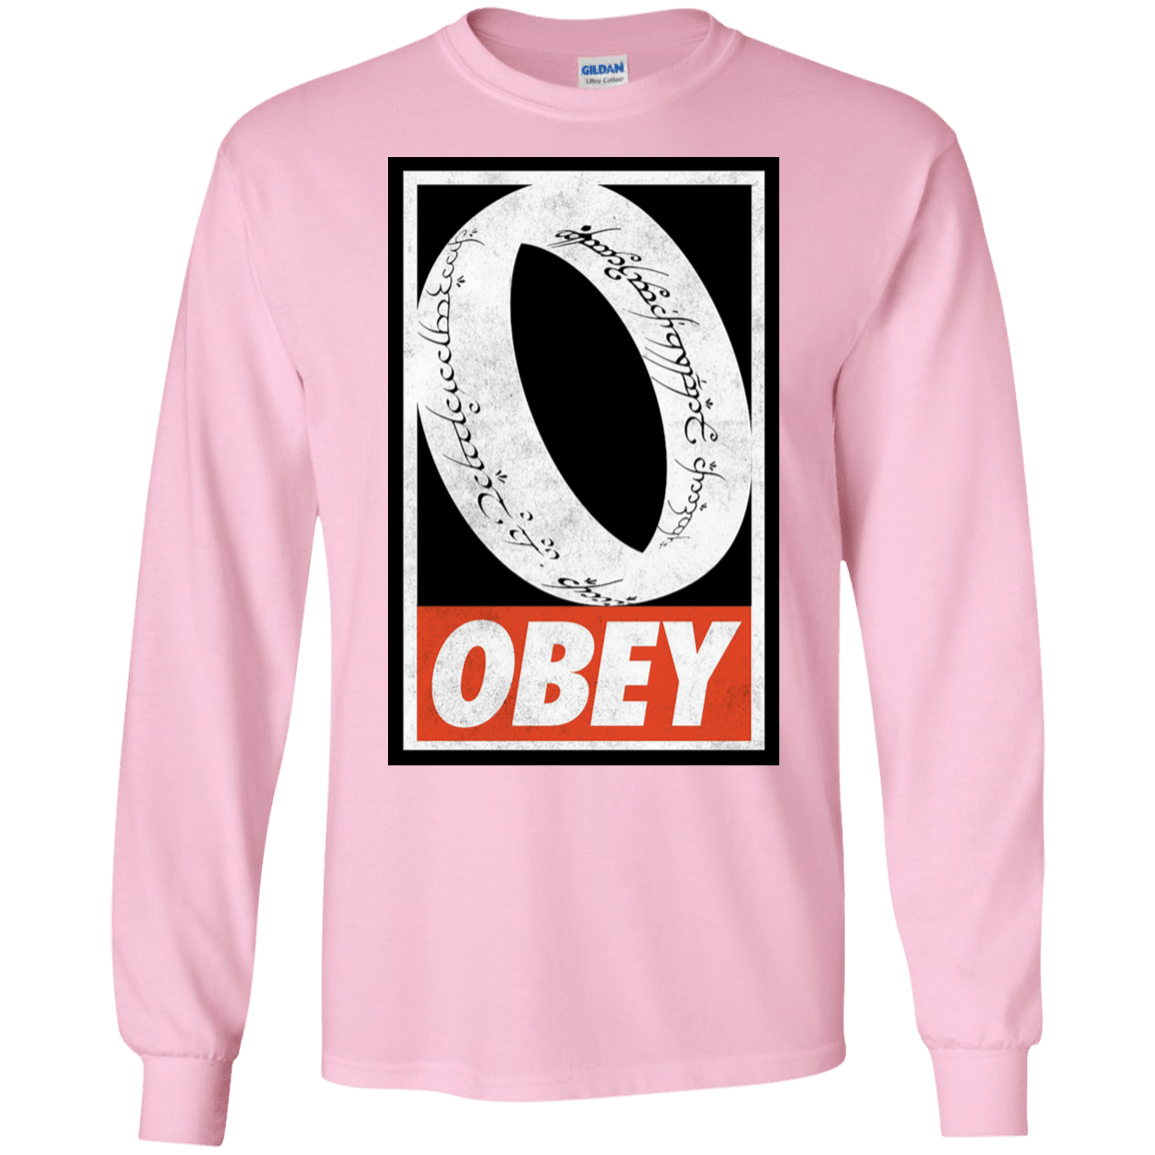 T-Shirts Light Pink / S Obey One Ring Men's Long Sleeve T-Shirt